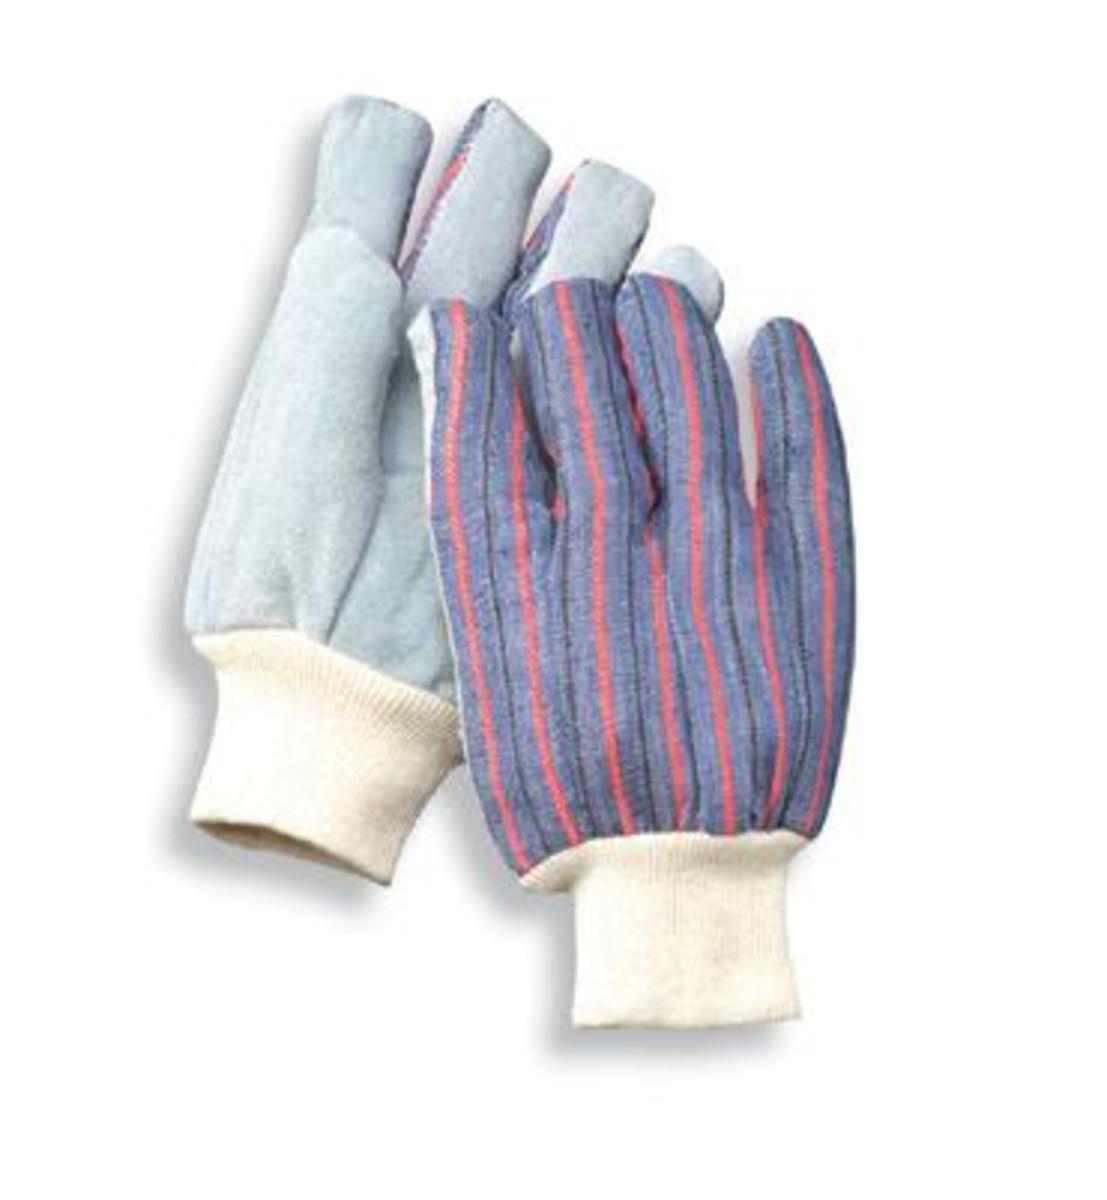 RADNOR® Ladies Economy Grade Split Leather Palm Gloves With Canvas Back And Knit Wrist